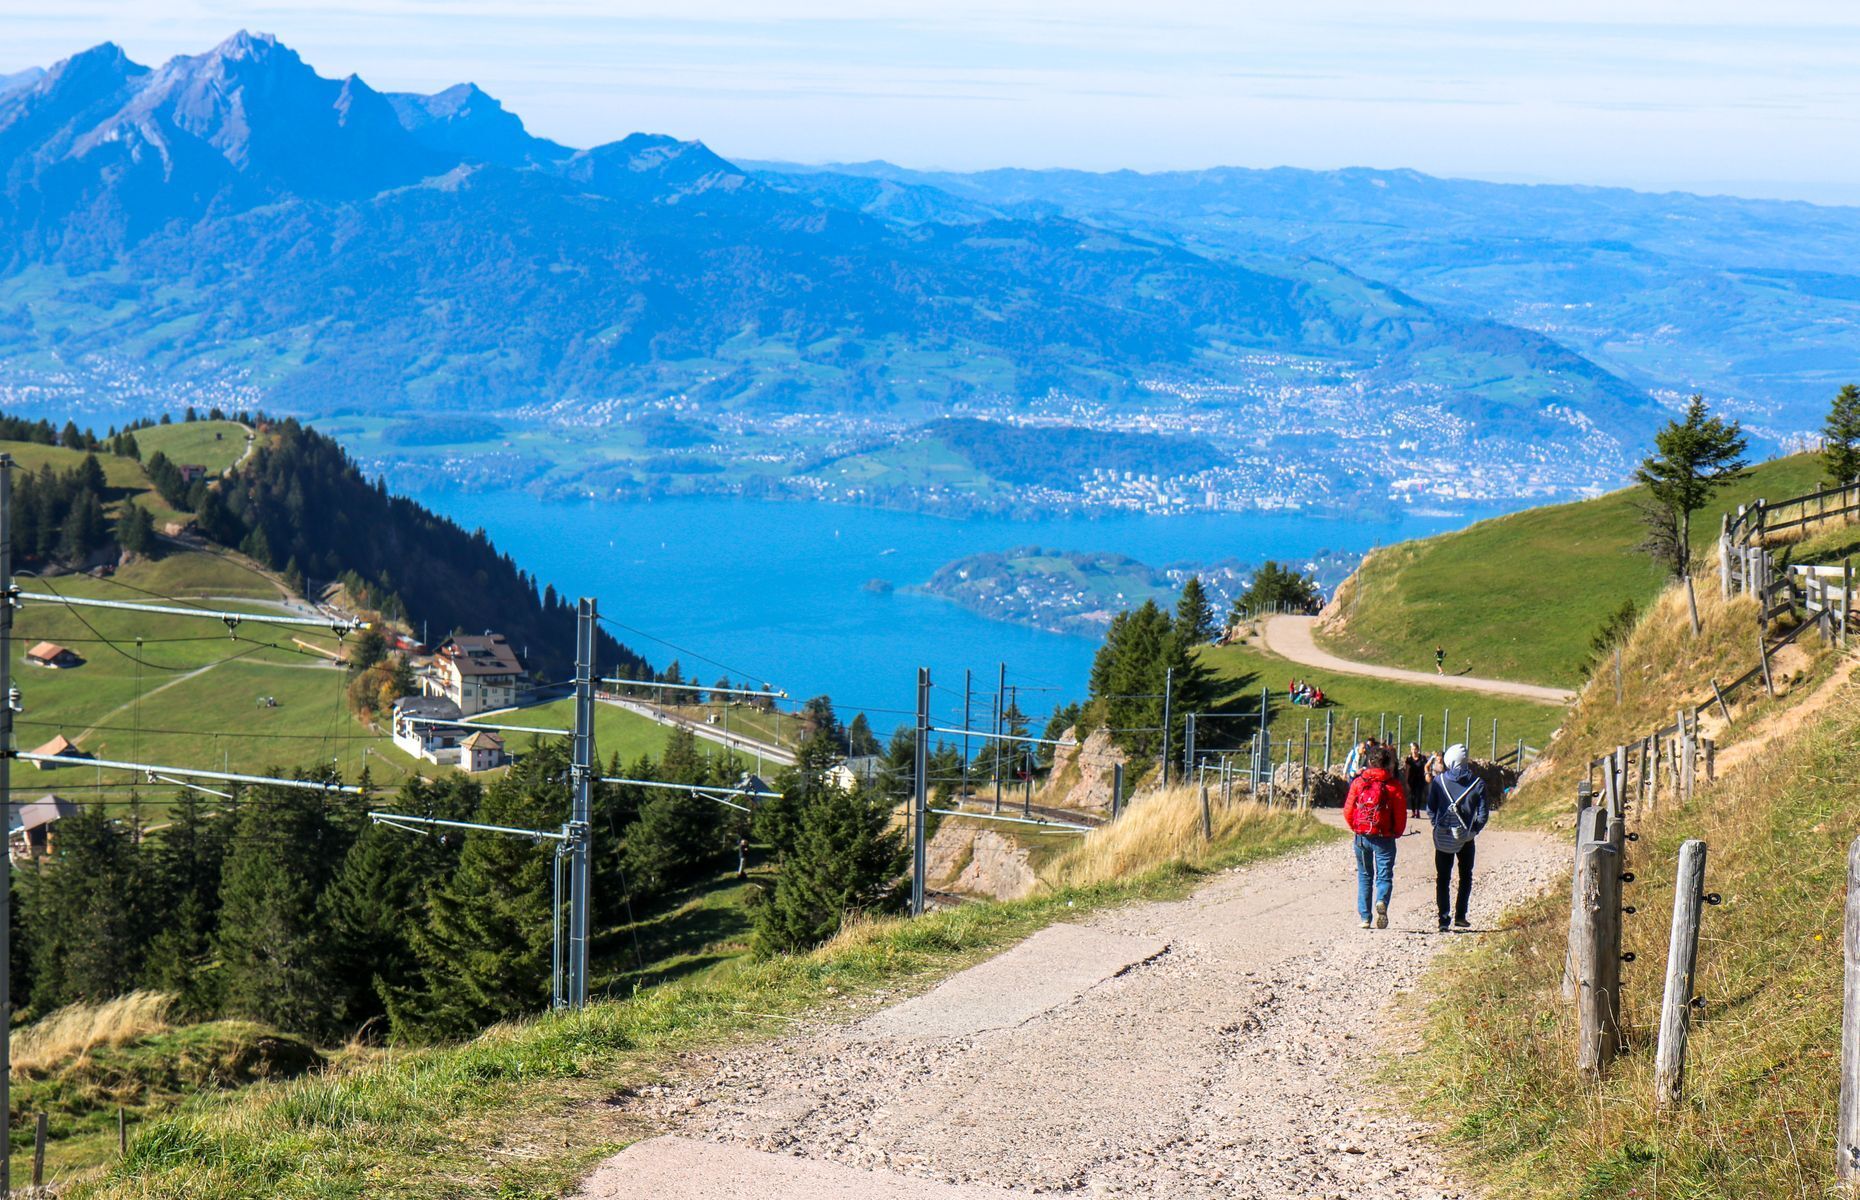 <p>Found in the heart of Switzerland, <a href="https://www.rigi.ch/en" title="https://www.rigi.ch/en">Rigi Mountain</a> is easily accessible from all directions and is a popular day trip for tourists and locals alike thanks to its views of the surrounding alps and lakes. Most tourists take advantage of the <a href="https://www.sbb.ch/en/leisure-holidays/inspiration/international-guests/swiss-travel-pass.html" title="https://www.sbb.ch/en/leisure-holidays/inspiration/international-guests/swiss-travel-pass.html">Swiss Travel Pass</a> for unlimited travel by train, bus and boat—otherwise things can quickly add up. One <a href="https://www.tripadvisor.com/ShowUserReviews-g188064-d542499-r546368160-Mt_Rigi-Lucerne.html" title="https://www.tripadvisor.com/ShowUserReviews-g188064-d542499-r546368160-Mt_Rigi-Lucerne.html">tourist from the UK</a> found Mount Rigi to be “very expensive,” saying you get little for your money, while another on TripAdvisor said it wasn’t really worth it “unless you’ve never seen a mountain before.” </p>